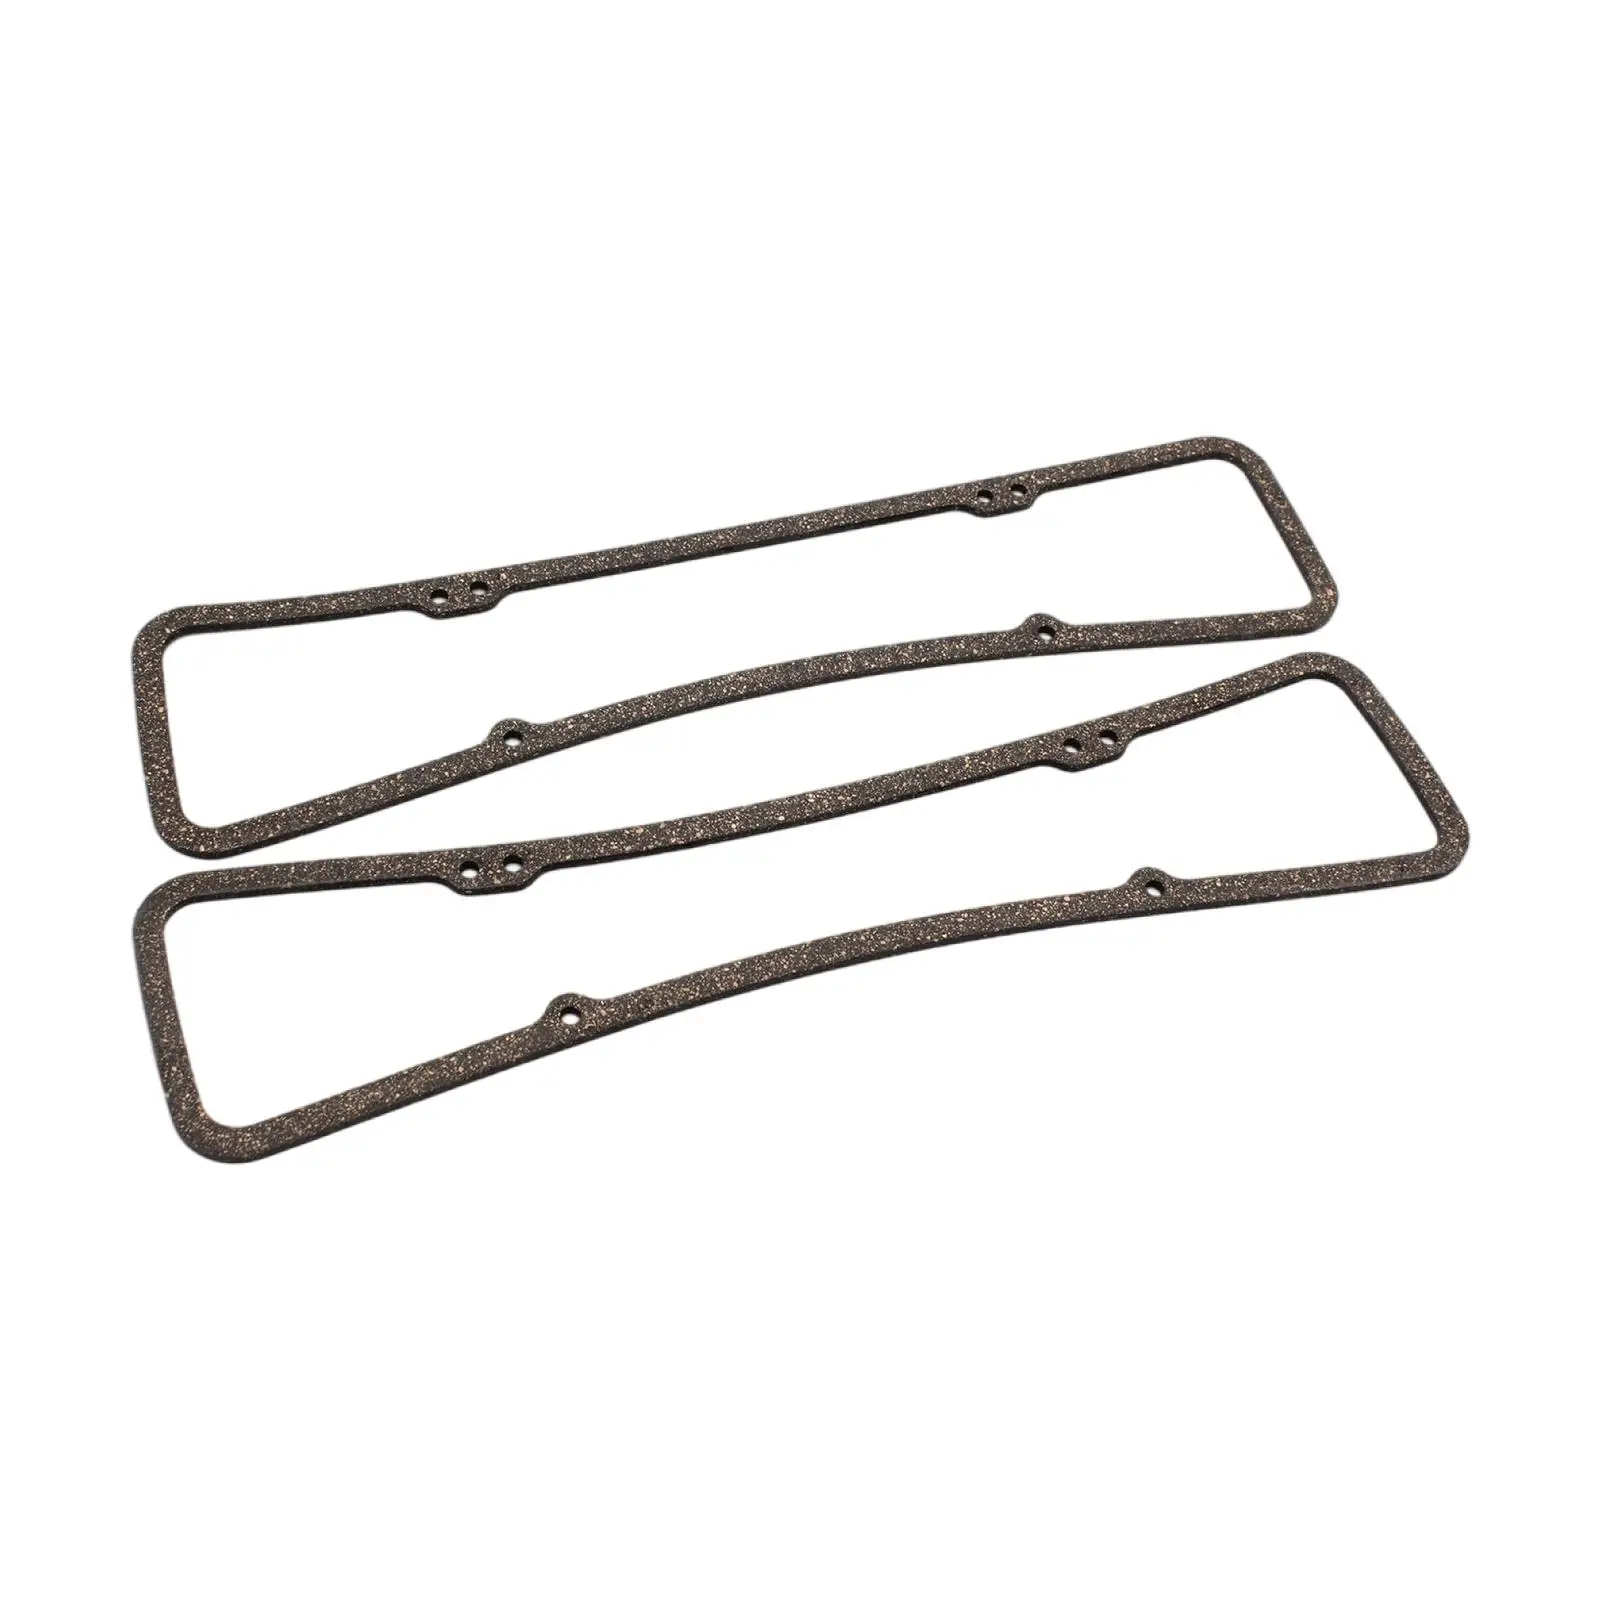 Cover Gaskets Set 7483 2x Fit for 305 327 350 383 400 Engines